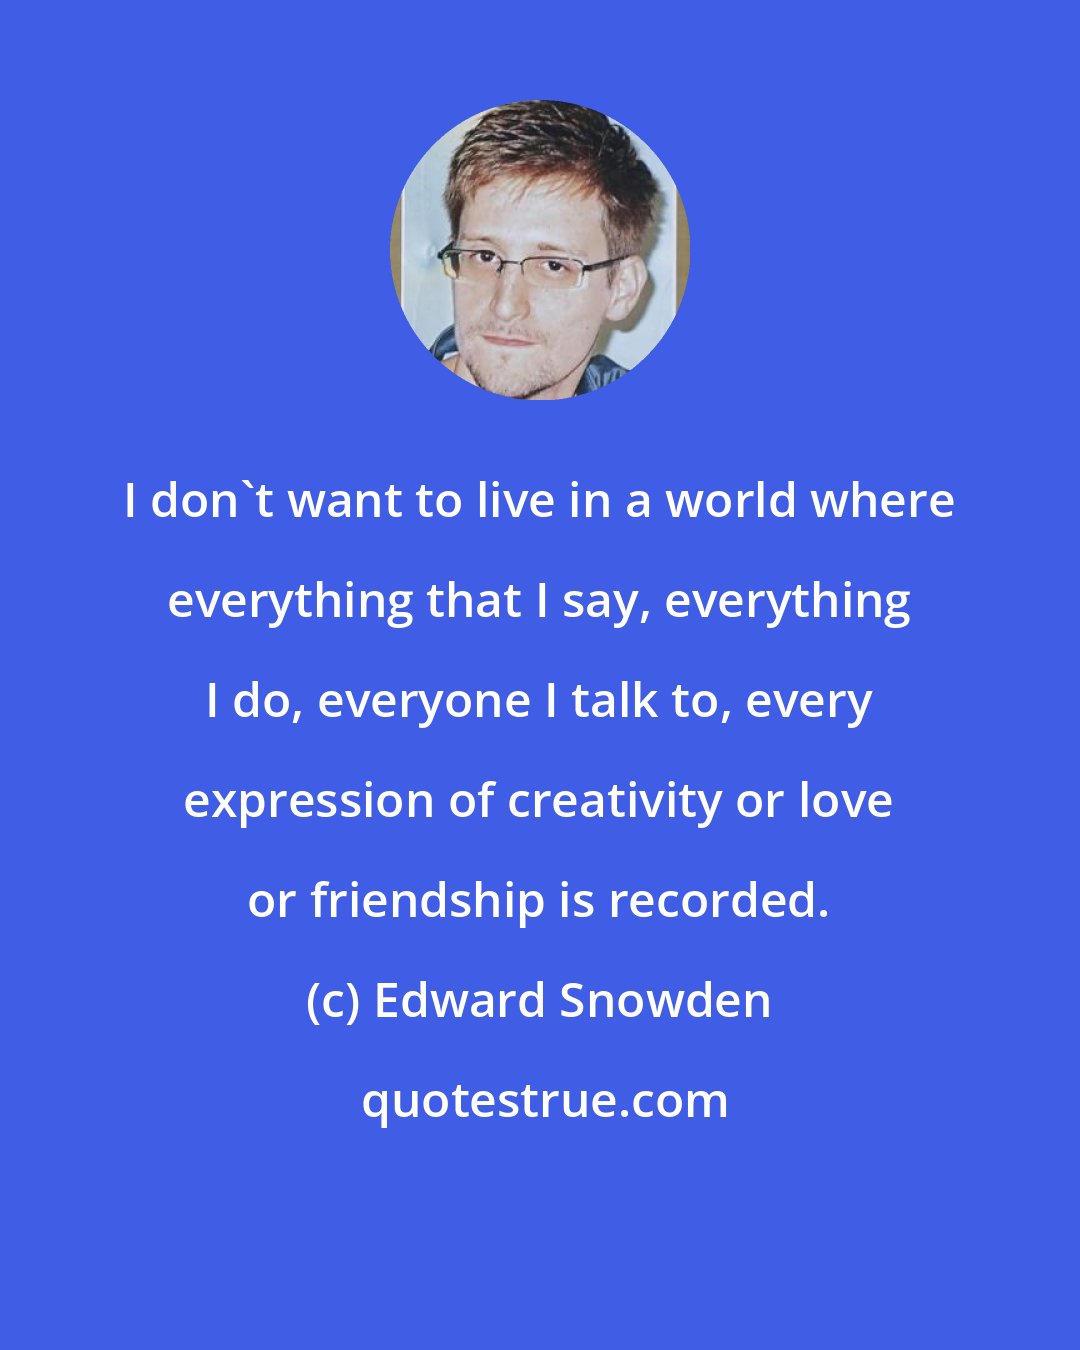 Edward Snowden: I don't want to live in a world where everything that I say, everything I do, everyone I talk to, every expression of creativity or love or friendship is recorded.